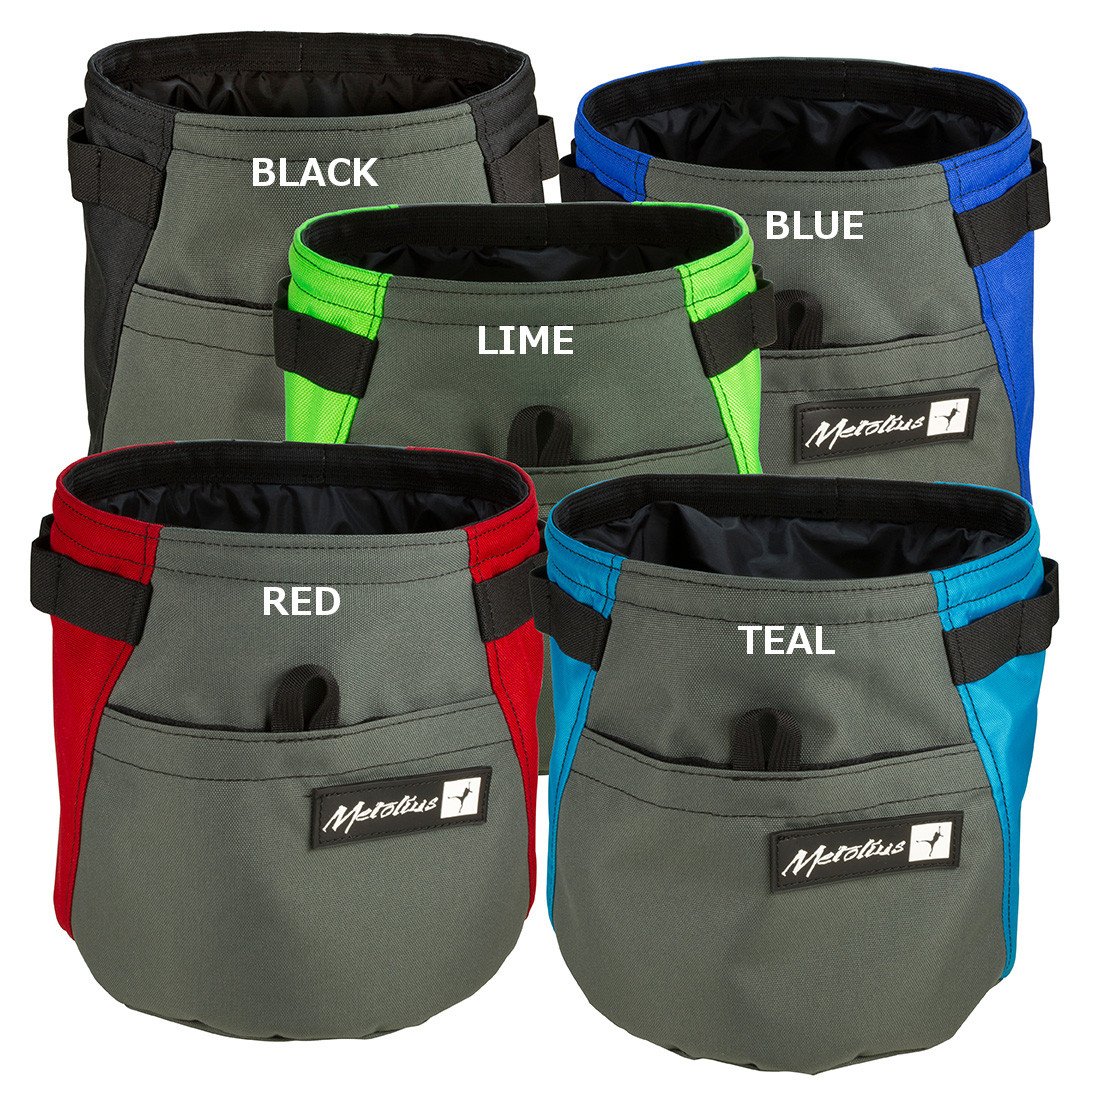 Metolius Dust Bin Bouldering Bucket Colour Options, showing 5 in a clump